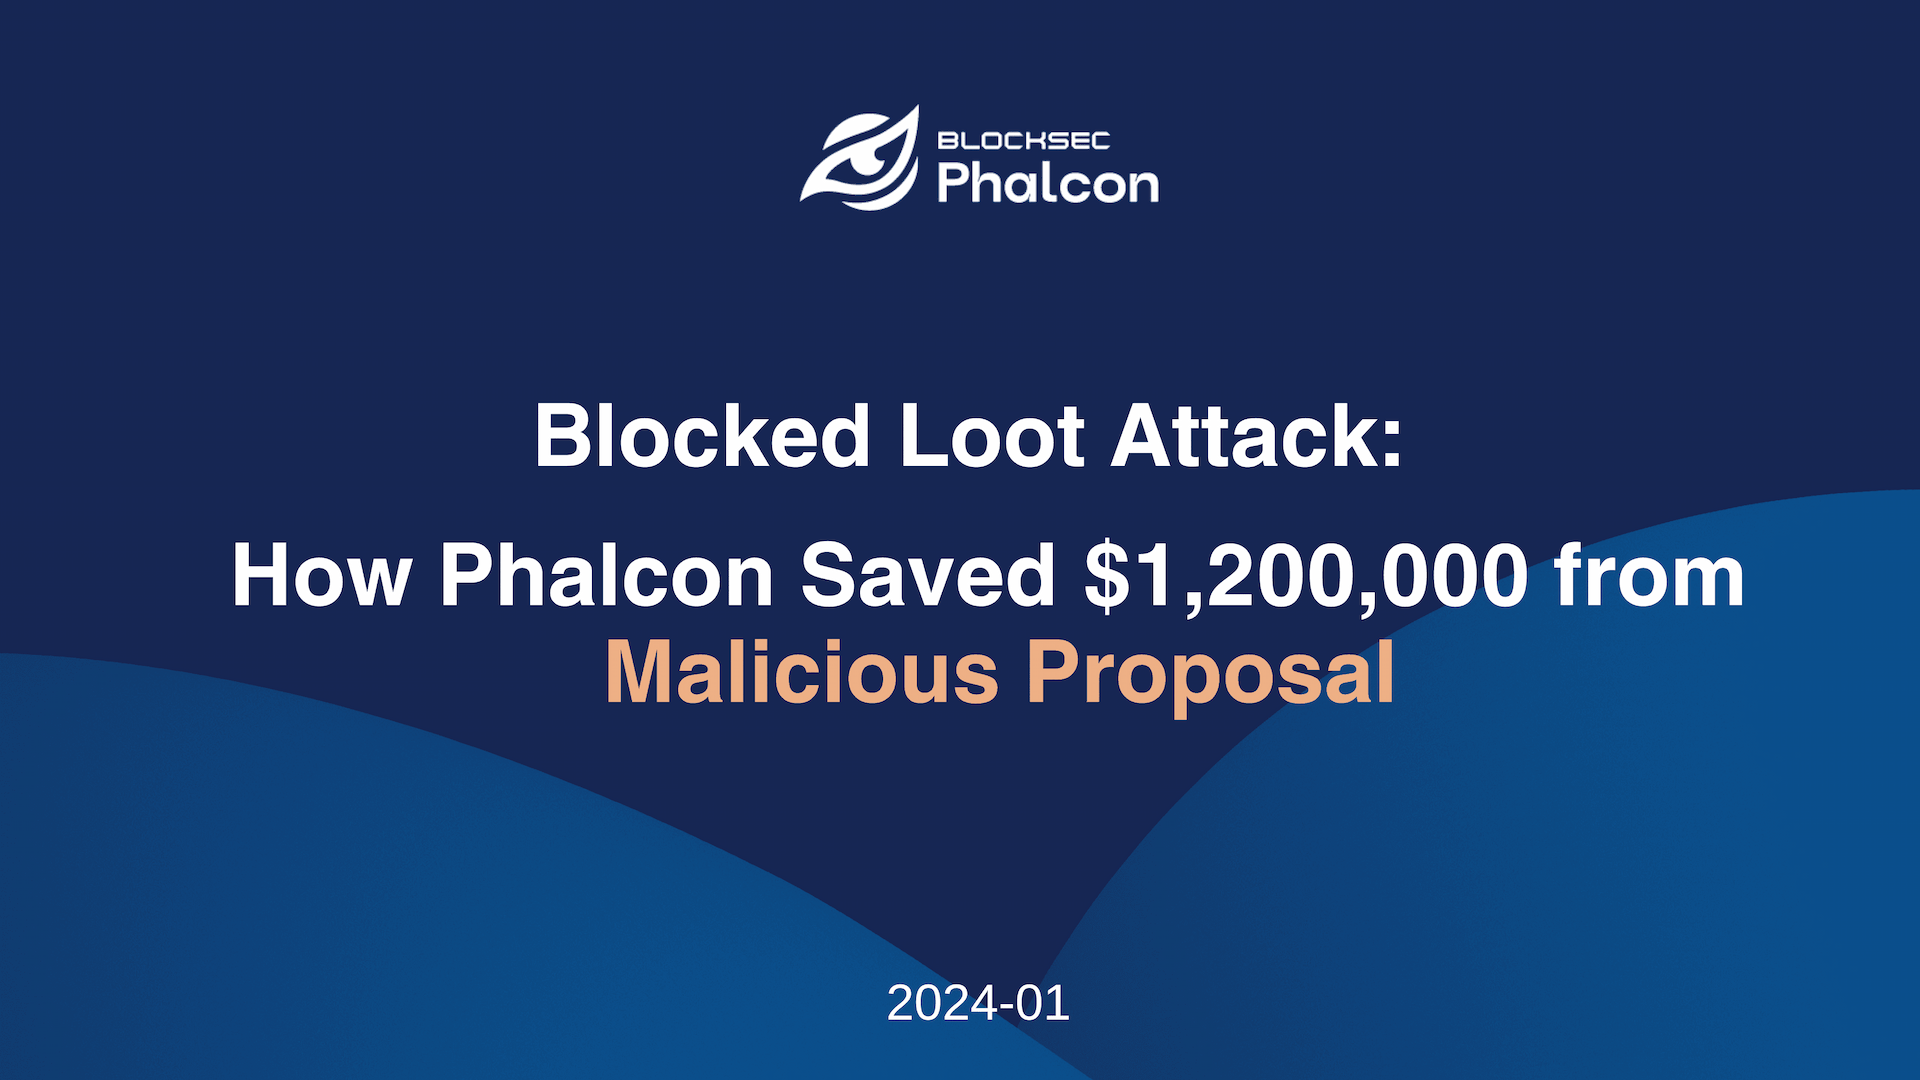 #6 Blocked Loot Attack: How Phalcon Saved $1.2M from Malicious Proposal